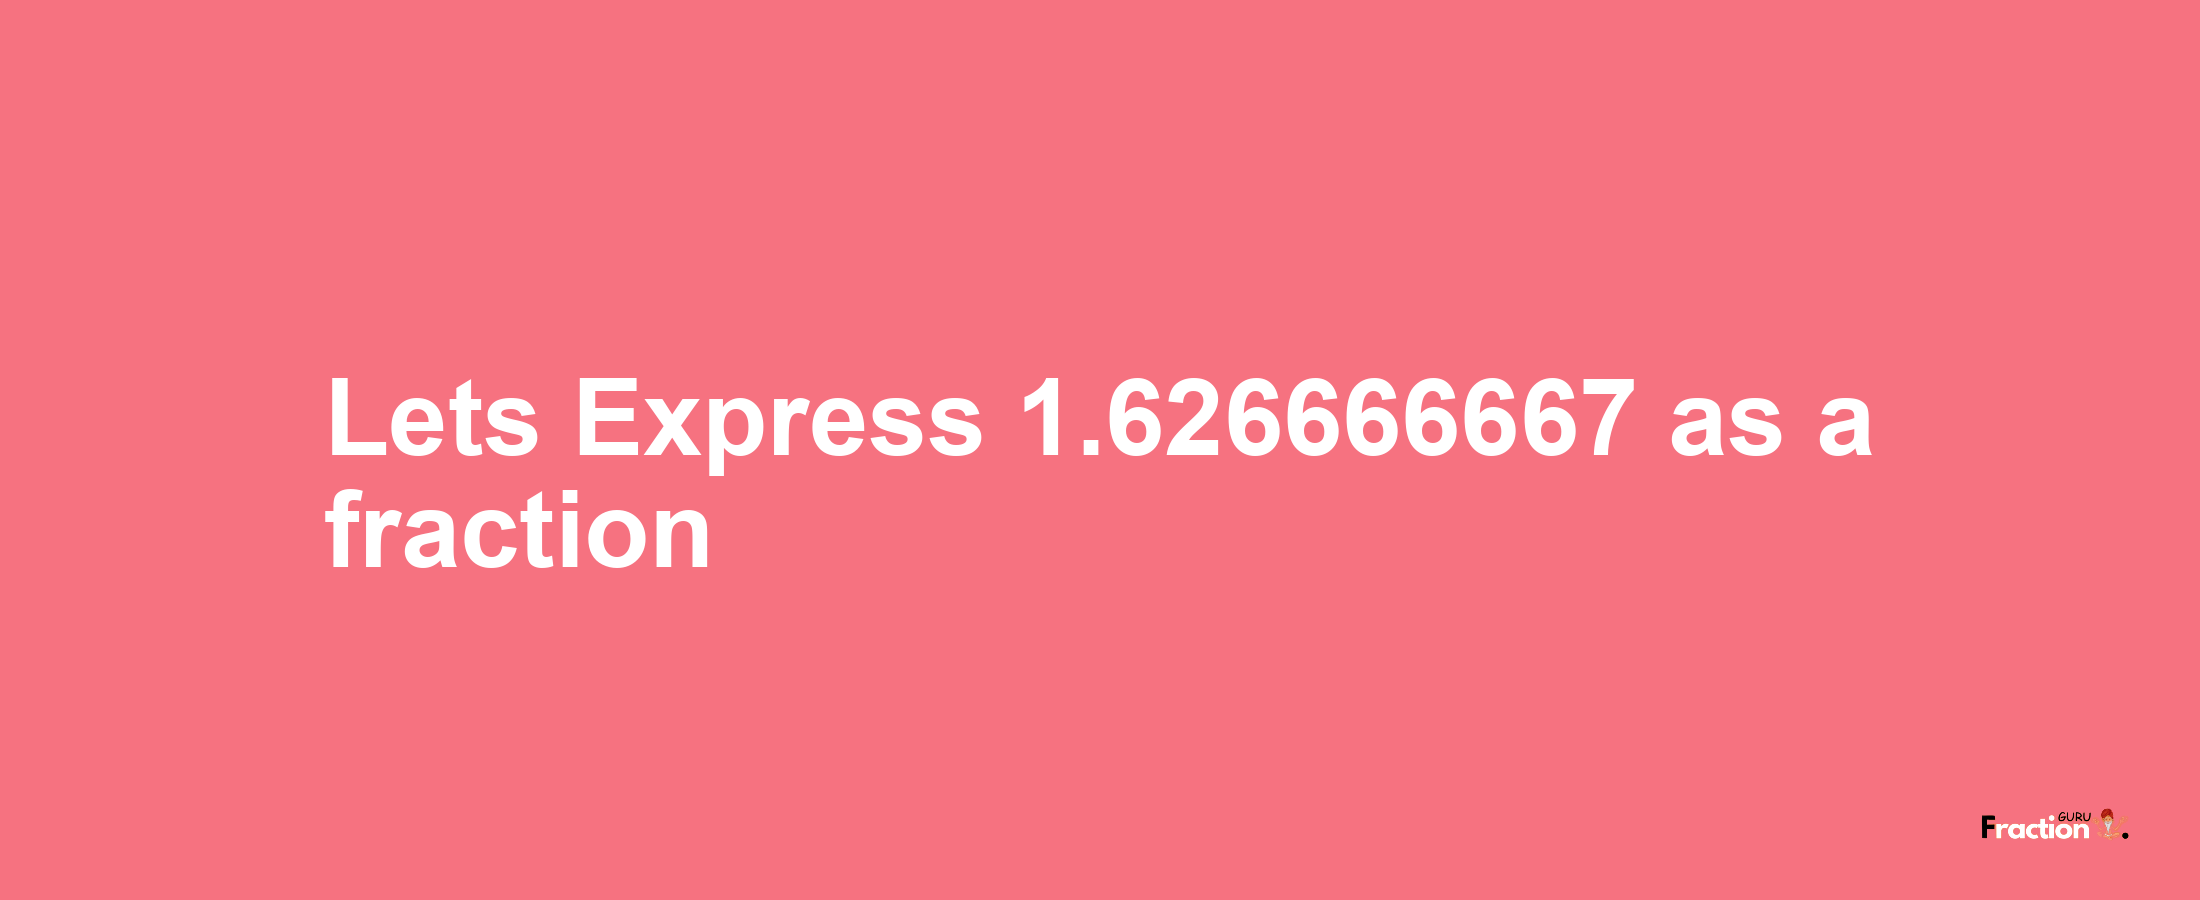 Lets Express 1.626666667 as afraction